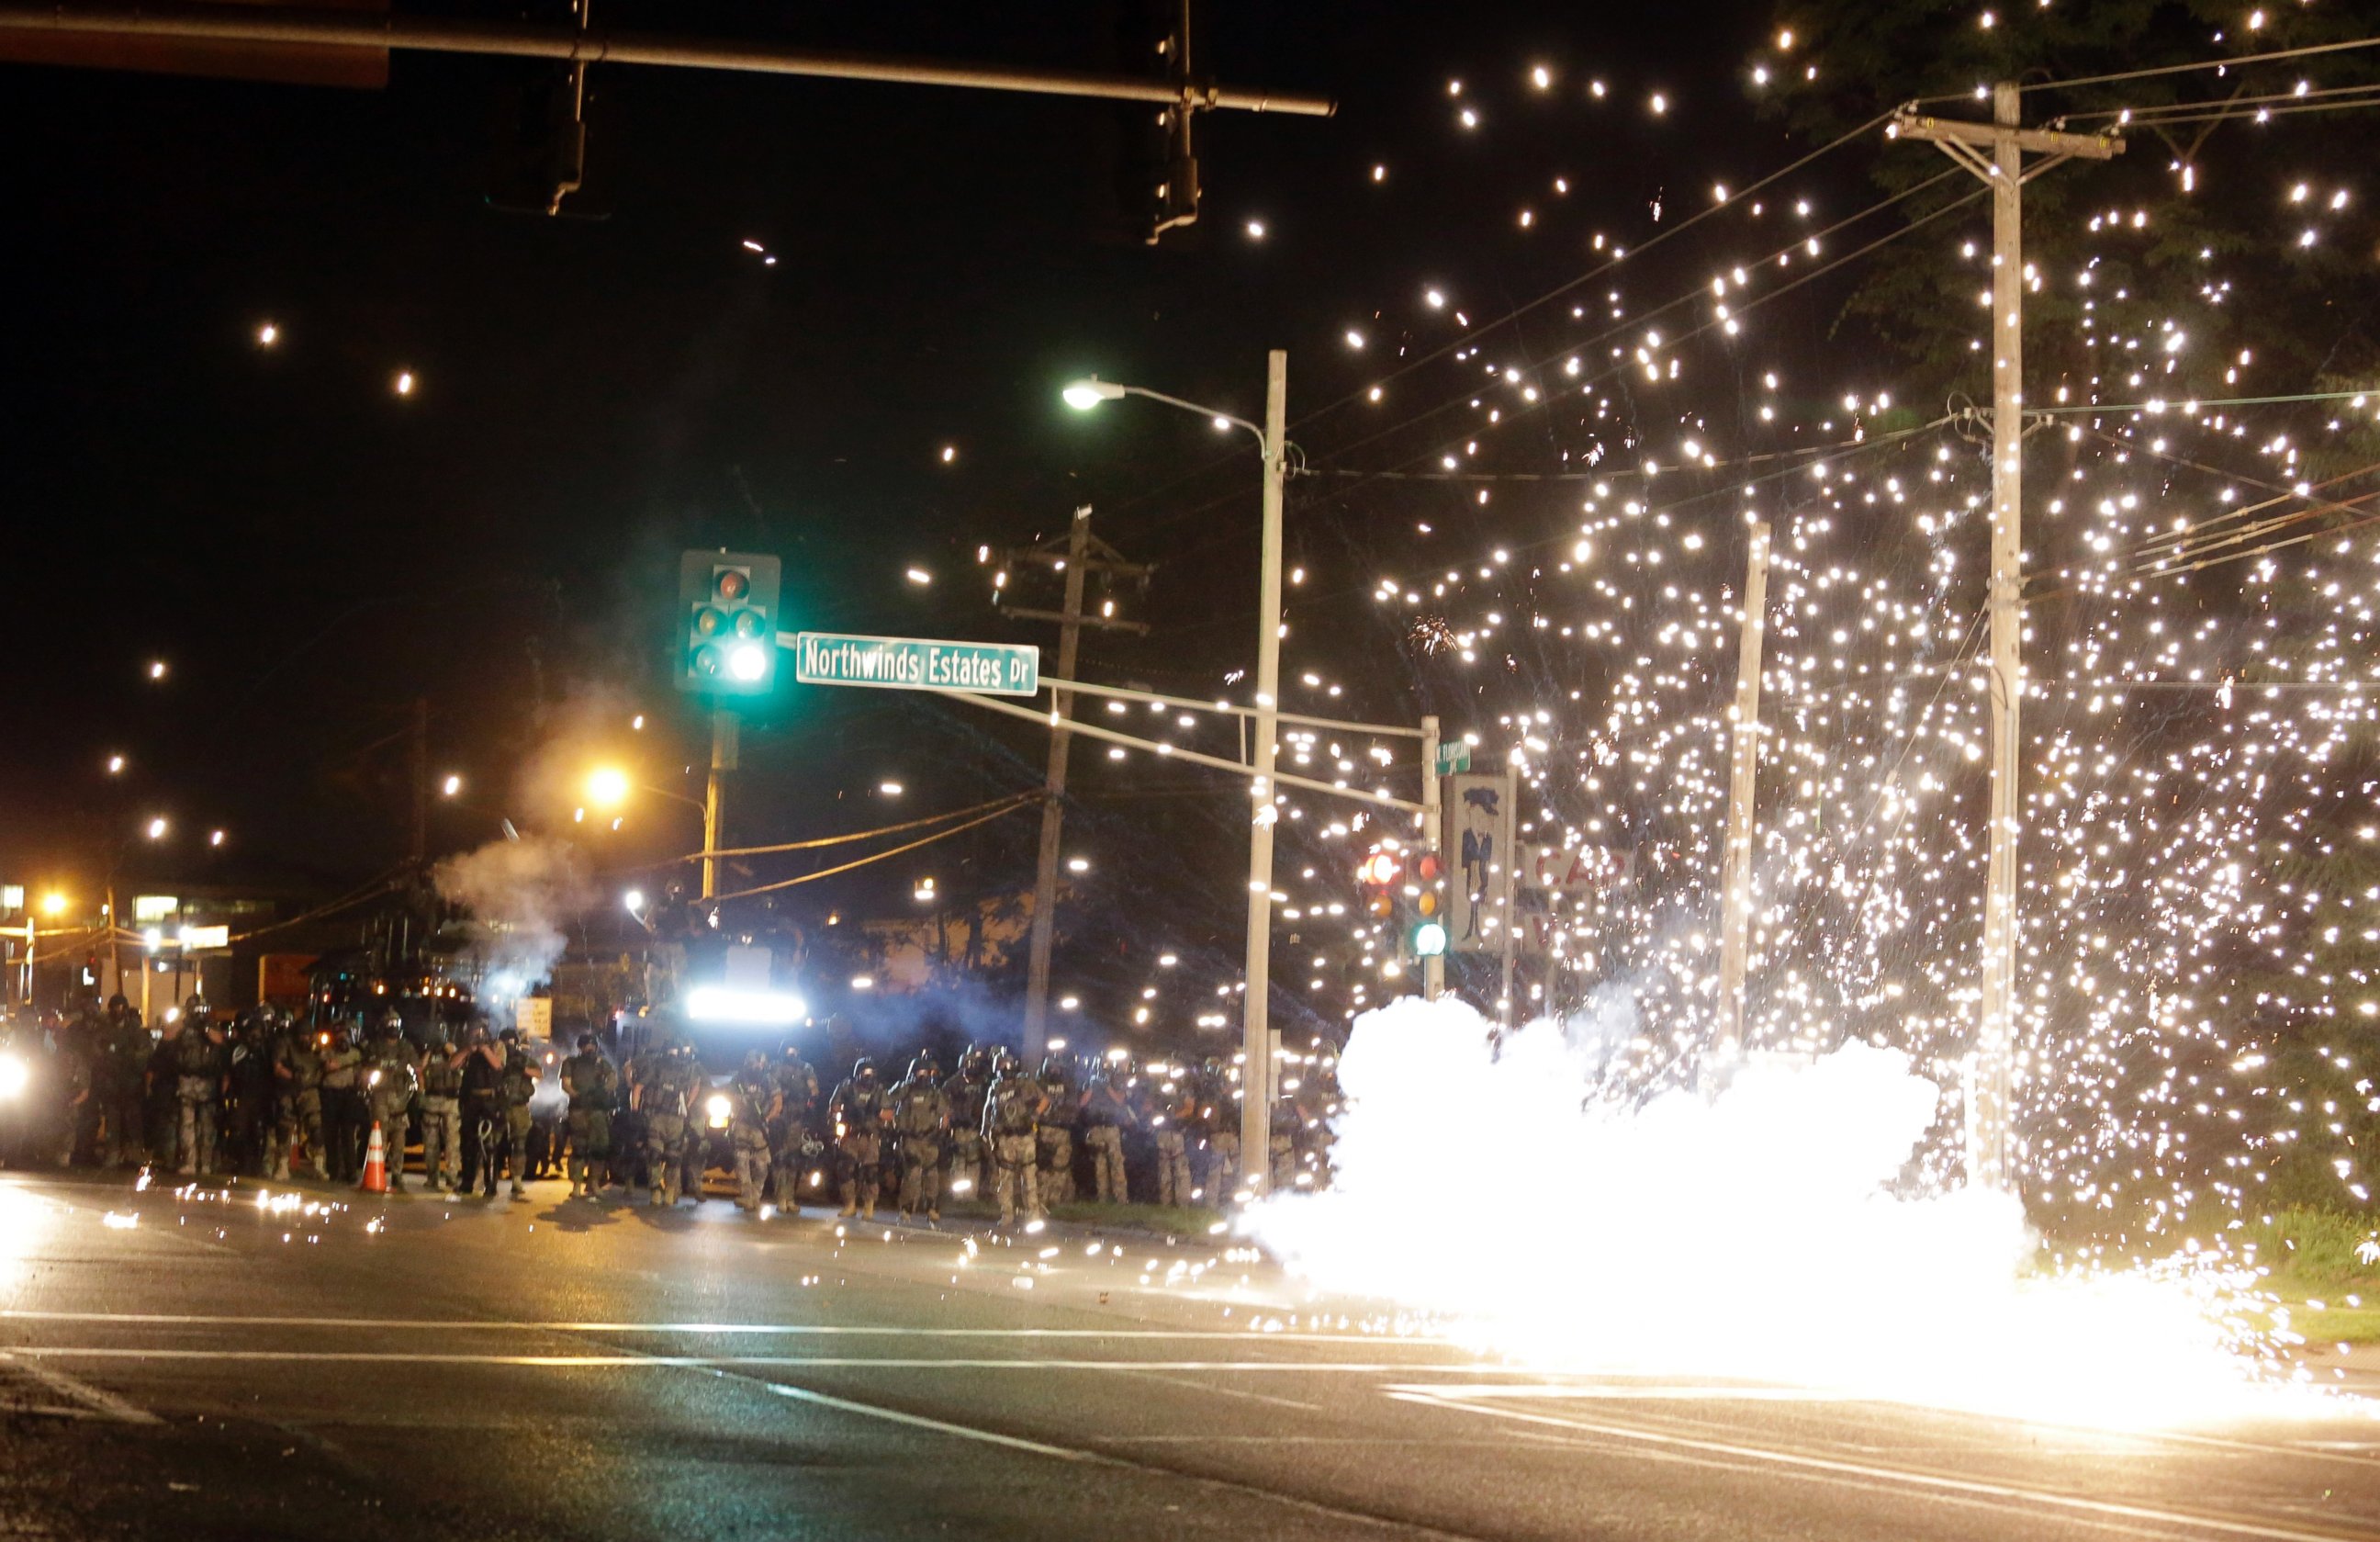 PHOTO: A device deployed by police goes off in the street as police and protesters clash Wednesday, Aug. 13, 2014, in Ferguson, Mo., the St. Louis suburb where an unarmed black teen was shot and killed by a police officer.